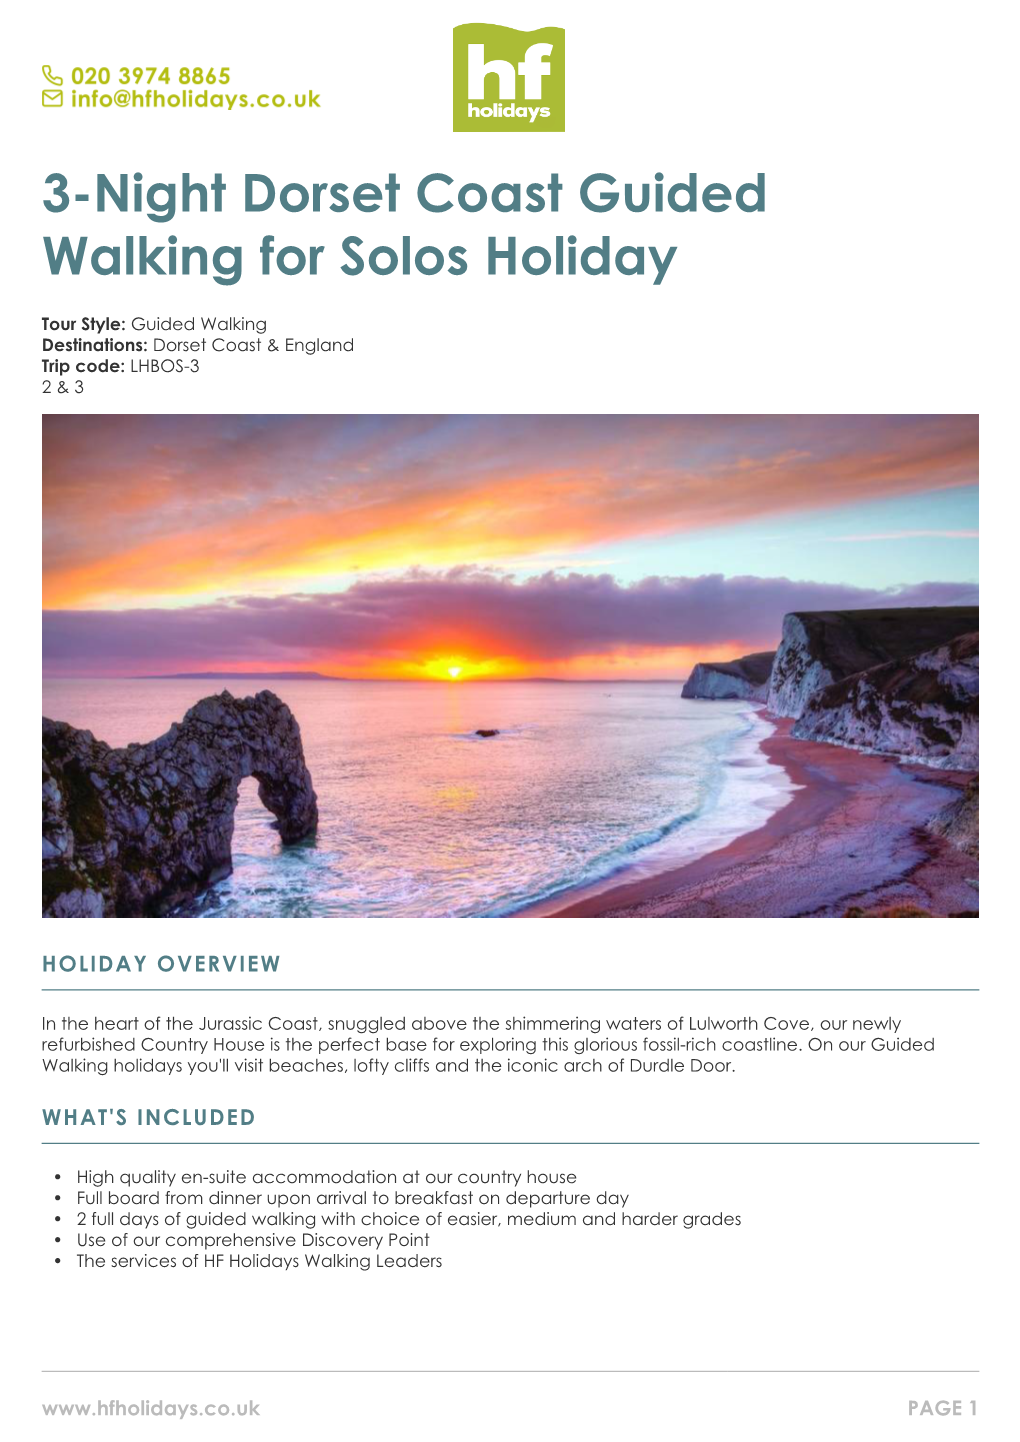 3-Night Dorset Coast Guided Walking for Solos Holiday